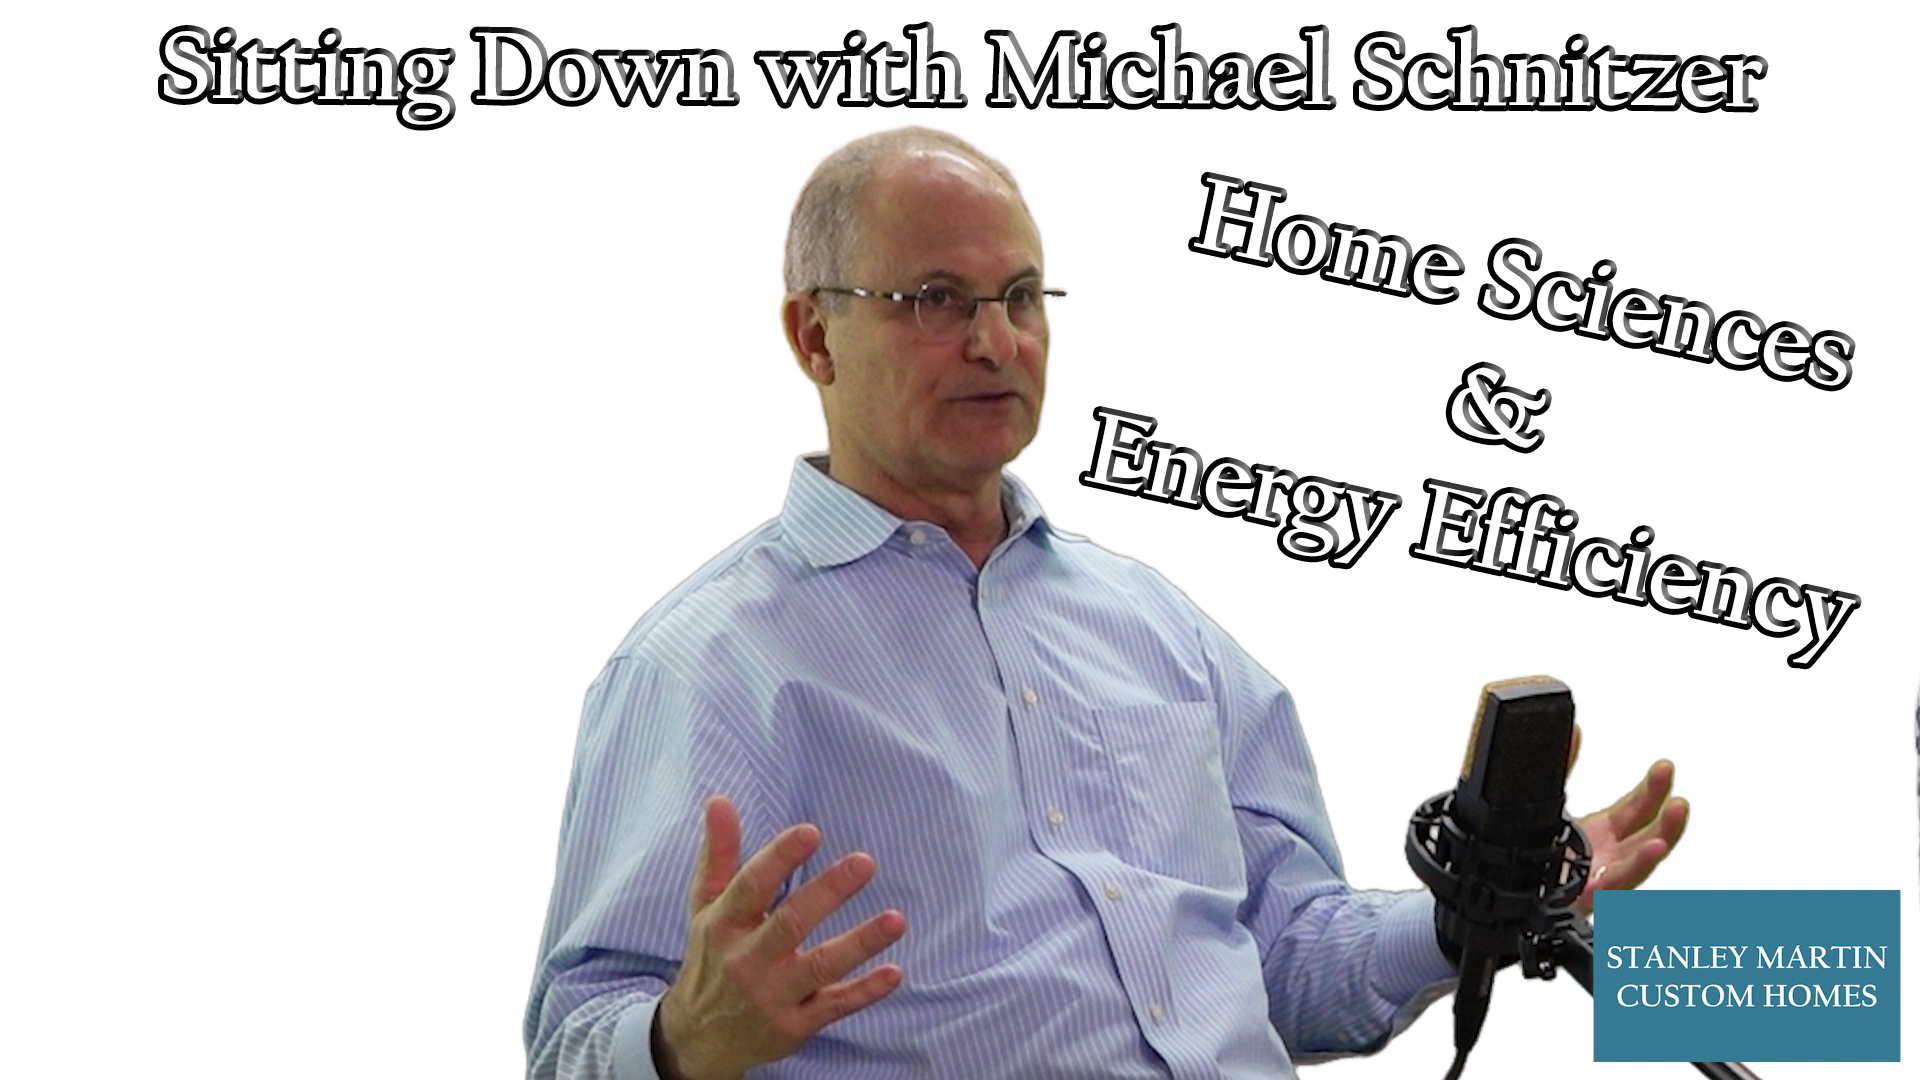 Sitting Down with President Michael Schnitzer | Stanley Martin Home Sciences & Energy Efficiency